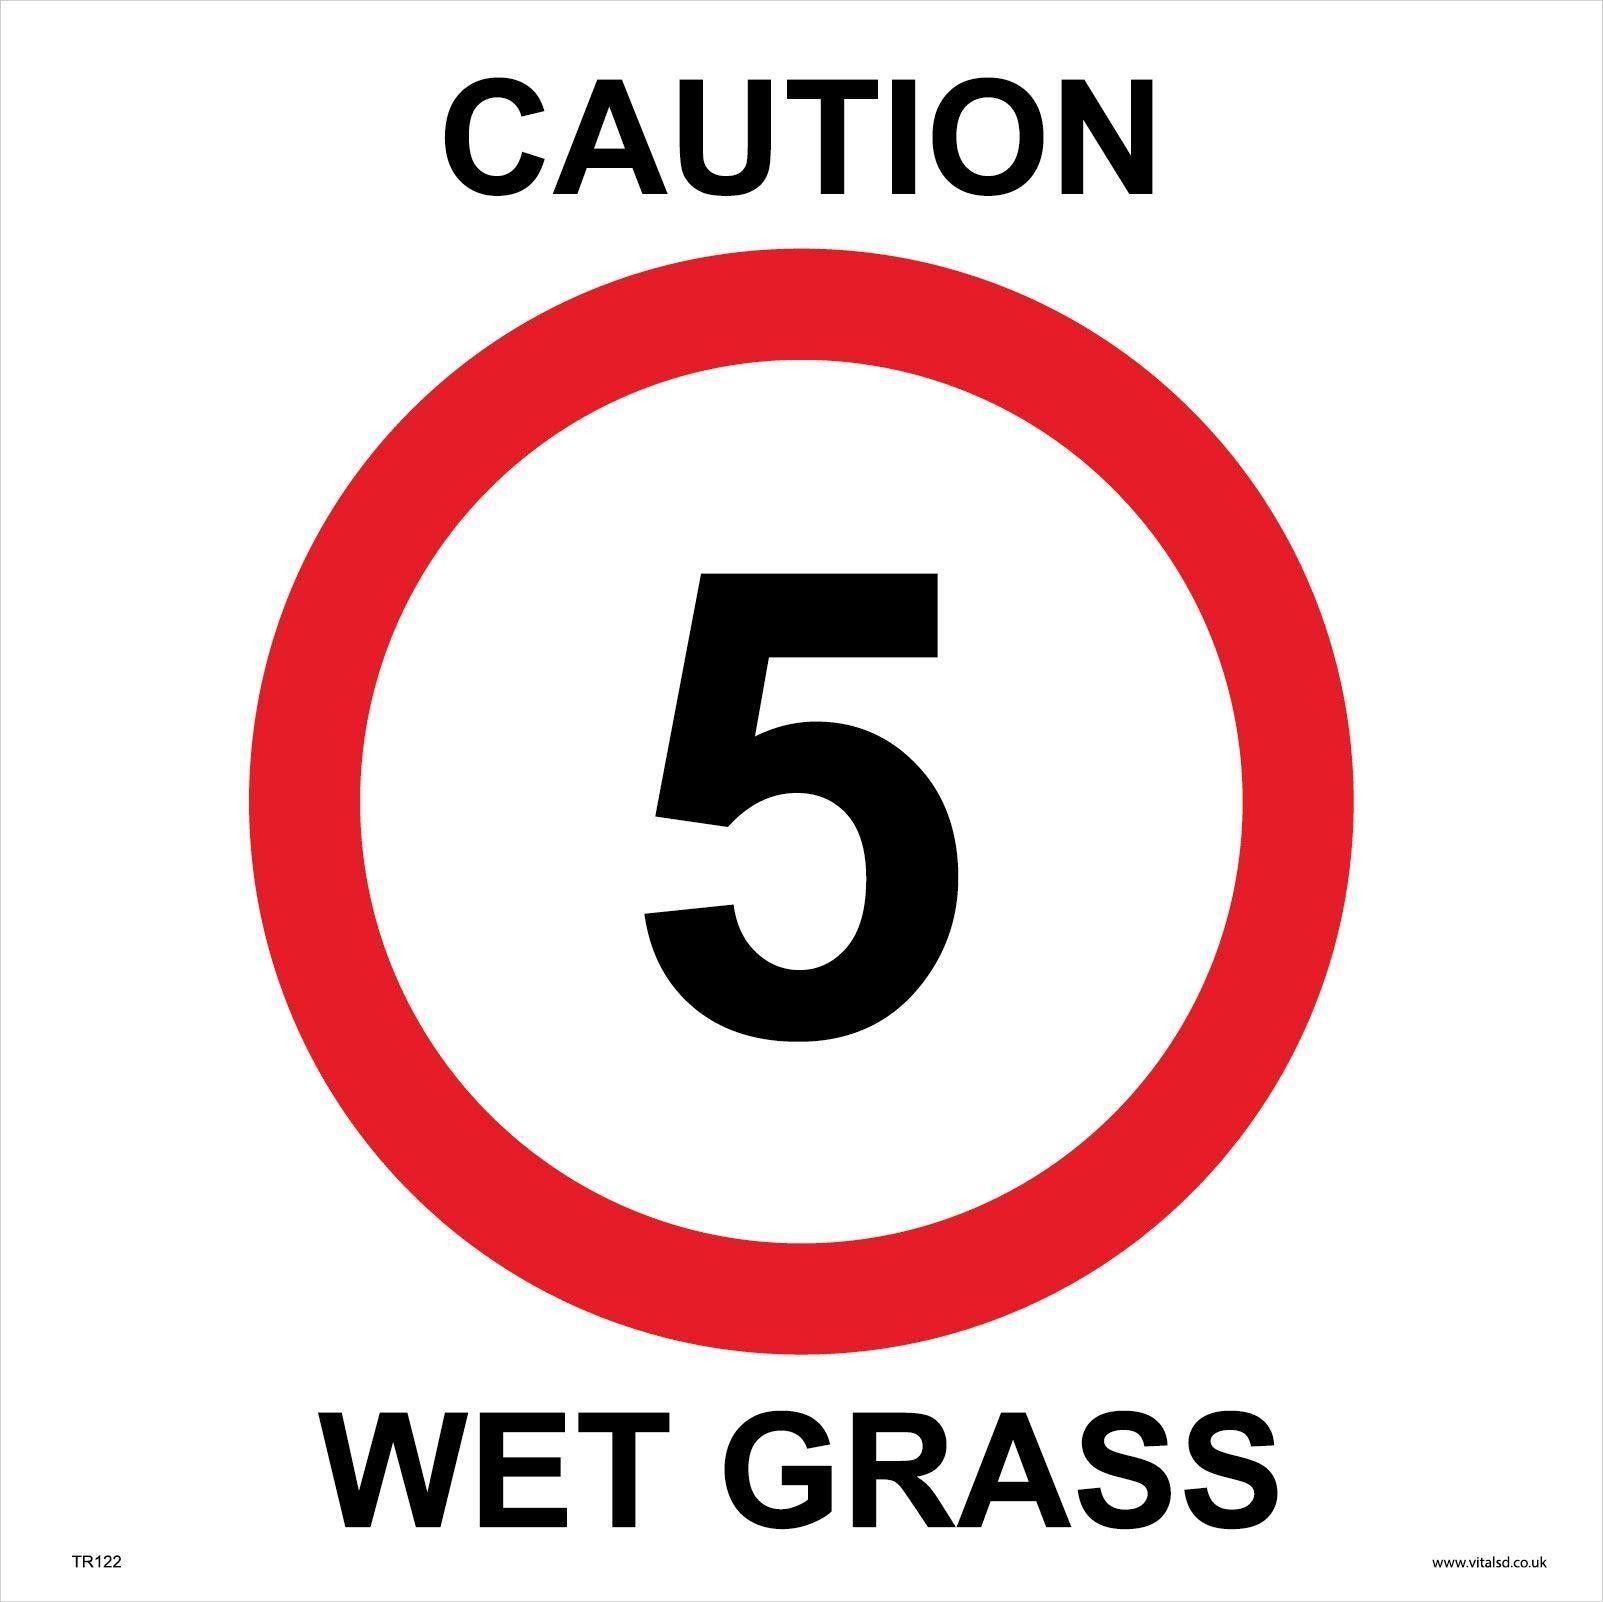 White with Red Circle X Logo - TR122-00-0600-0600 Caution Wet Grass 5Mph Sign 600 x 600mm - 24 x 24 ...